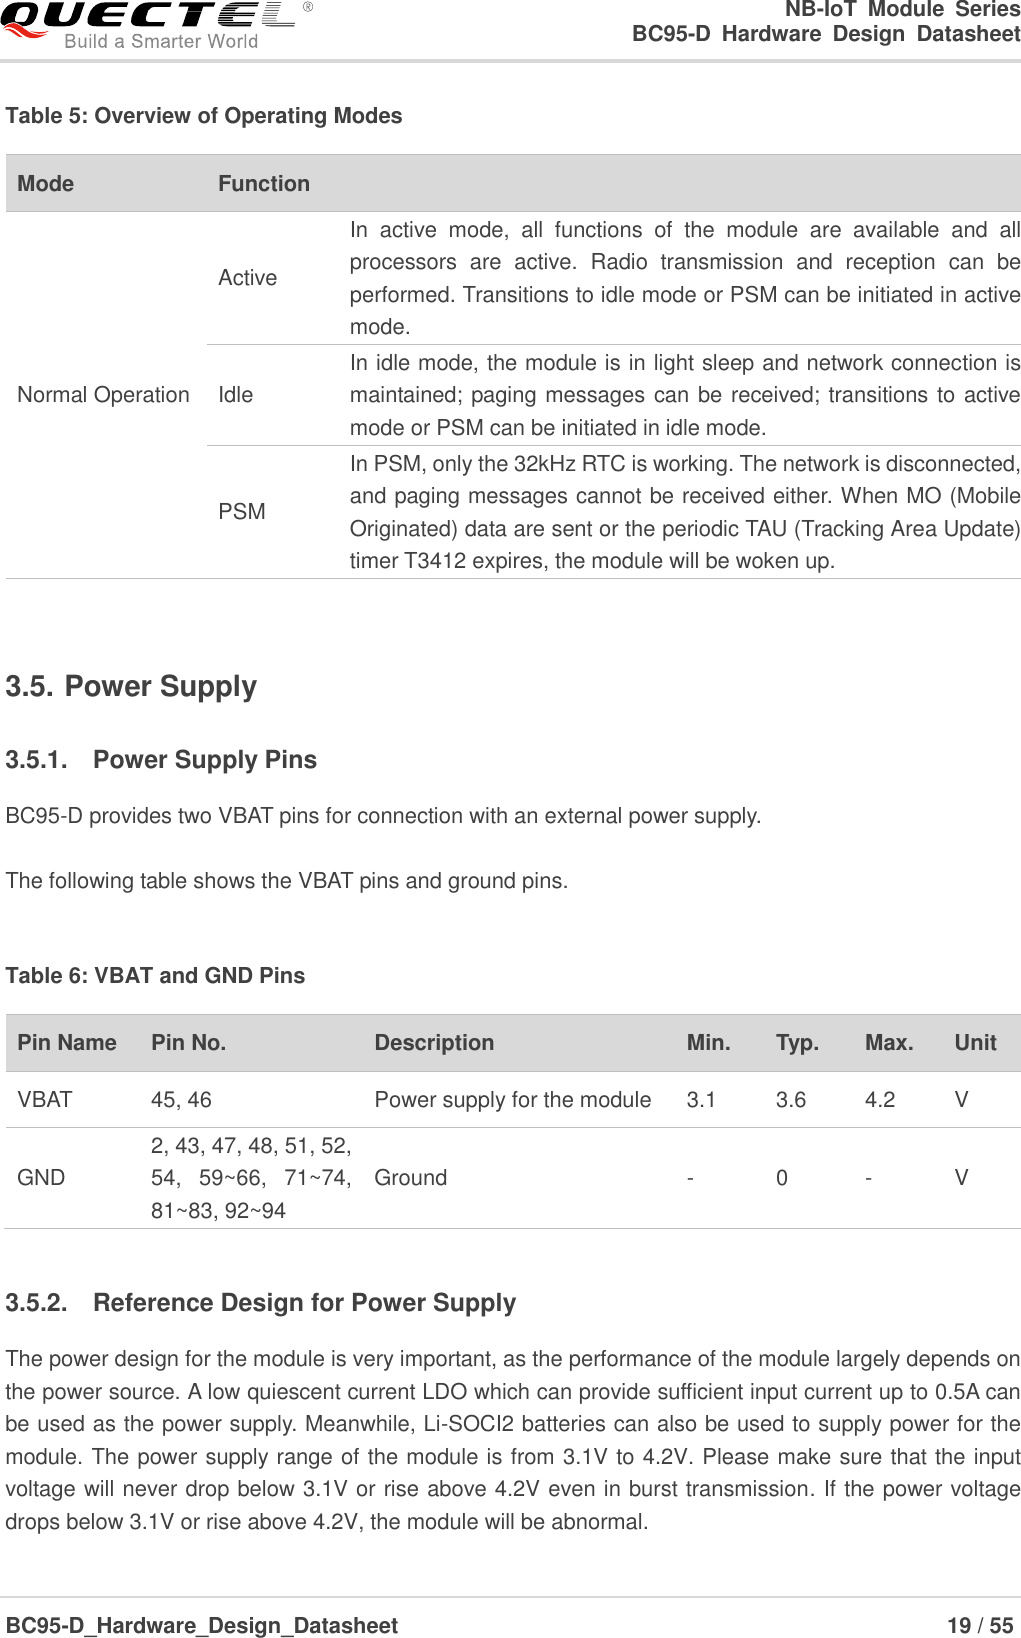                                                            NB-IoT  Module  Series                                                          BC95-D  Hardware  Design  Datasheet BC95-D_Hardware_Design_Datasheet                                                                    19 / 55    Table 5: Overview of Operating Modes  3.5. Power Supply 3.5.1.  Power Supply Pins BC95-D provides two VBAT pins for connection with an external power supply.    The following table shows the VBAT pins and ground pins.  Table 6: VBAT and GND Pins  3.5.2.  Reference Design for Power Supply The power design for the module is very important, as the performance of the module largely depends on the power source. A low quiescent current LDO which can provide sufficient input current up to 0.5A can be used as the power supply. Meanwhile, Li-SOCI2 batteries can also be used to supply power for the module. The power supply range of the module is from 3.1V to 4.2V. Please make sure that the input voltage will never drop below 3.1V or rise above 4.2V even in burst transmission. If the power voltage drops below 3.1V or rise above 4.2V, the module will be abnormal.   Mode Function Normal Operation Active In  active  mode,  all  functions  of  the  module  are  available  and  all processors  are  active.  Radio  transmission  and  reception  can  be performed. Transitions to idle mode or PSM can be initiated in active mode. Idle In idle mode, the module is in light sleep and network connection is maintained; paging messages can be received; transitions to active mode or PSM can be initiated in idle mode. PSM In PSM, only the 32kHz RTC is working. The network is disconnected, and paging messages cannot be received either. When MO (Mobile Originated) data are sent or the periodic TAU (Tracking Area Update) timer T3412 expires, the module will be woken up. Pin Name   Pin No. Description Min. Typ. Max. Unit VBAT 45, 46 Power supply for the module 3.1 3.6 4.2 V GND 2, 43, 47, 48, 51, 52, 54,  59~66,  71~74, 81~83, 92~94 Ground - 0 - V 